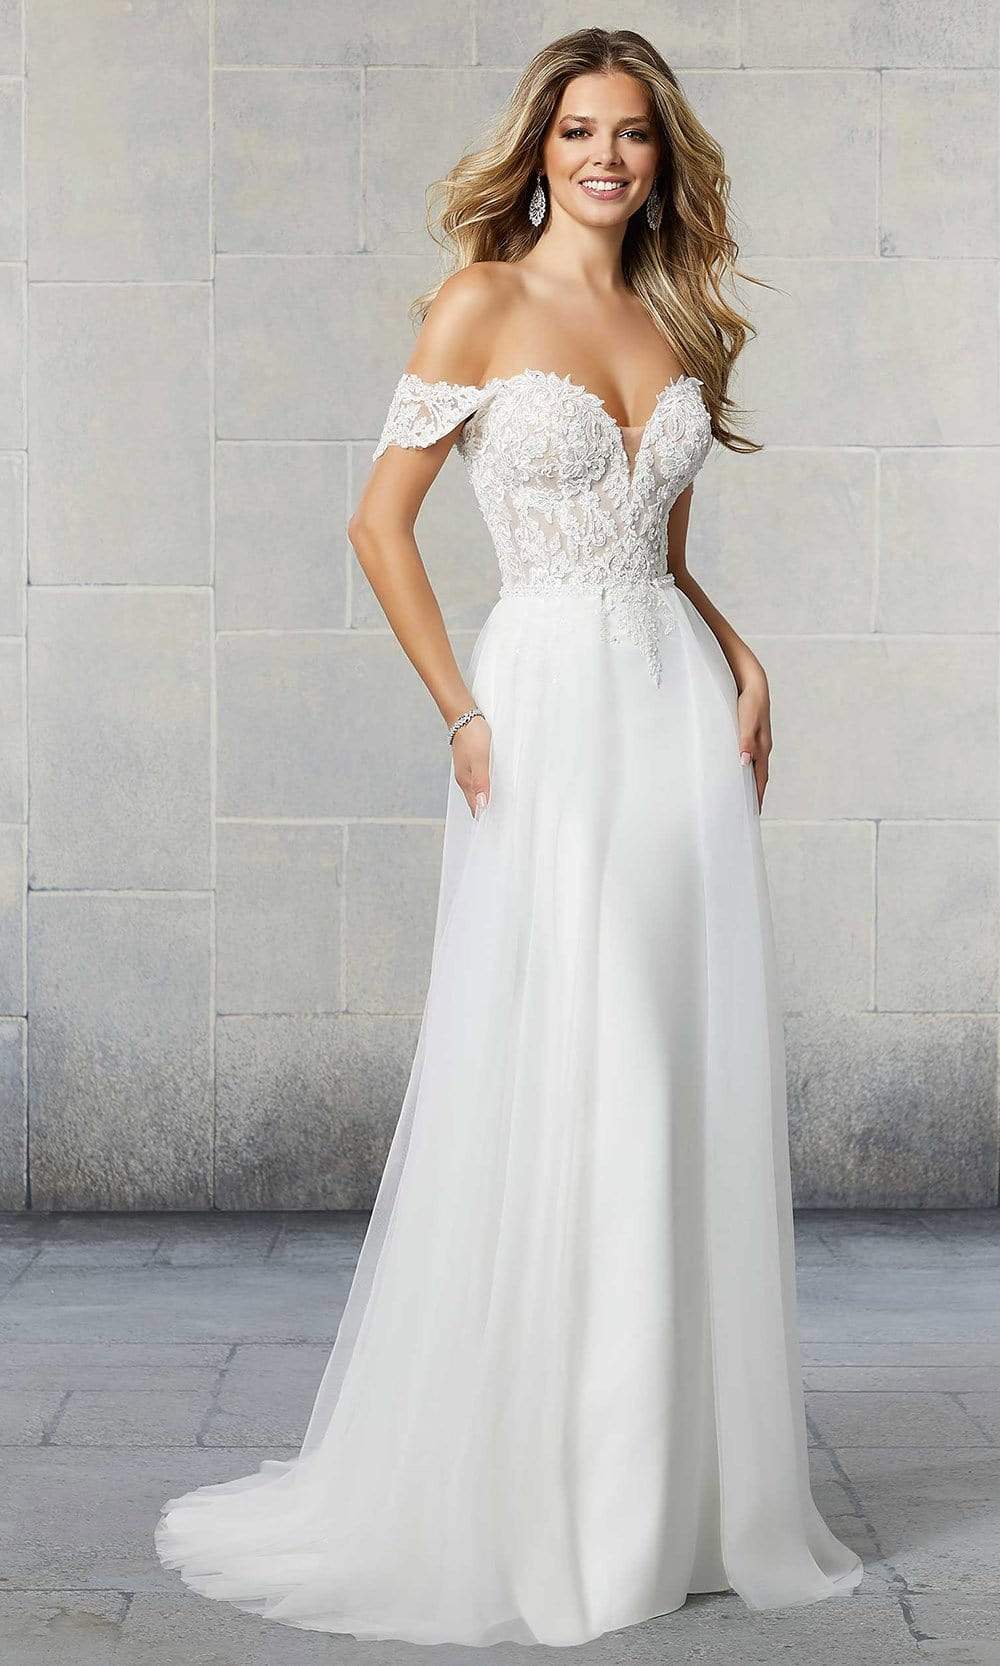 Mori Lee Bridal - 6922L Scout Applique Overskirt Wedding Gown Wedding Dresses 0 / Ivory/Nude